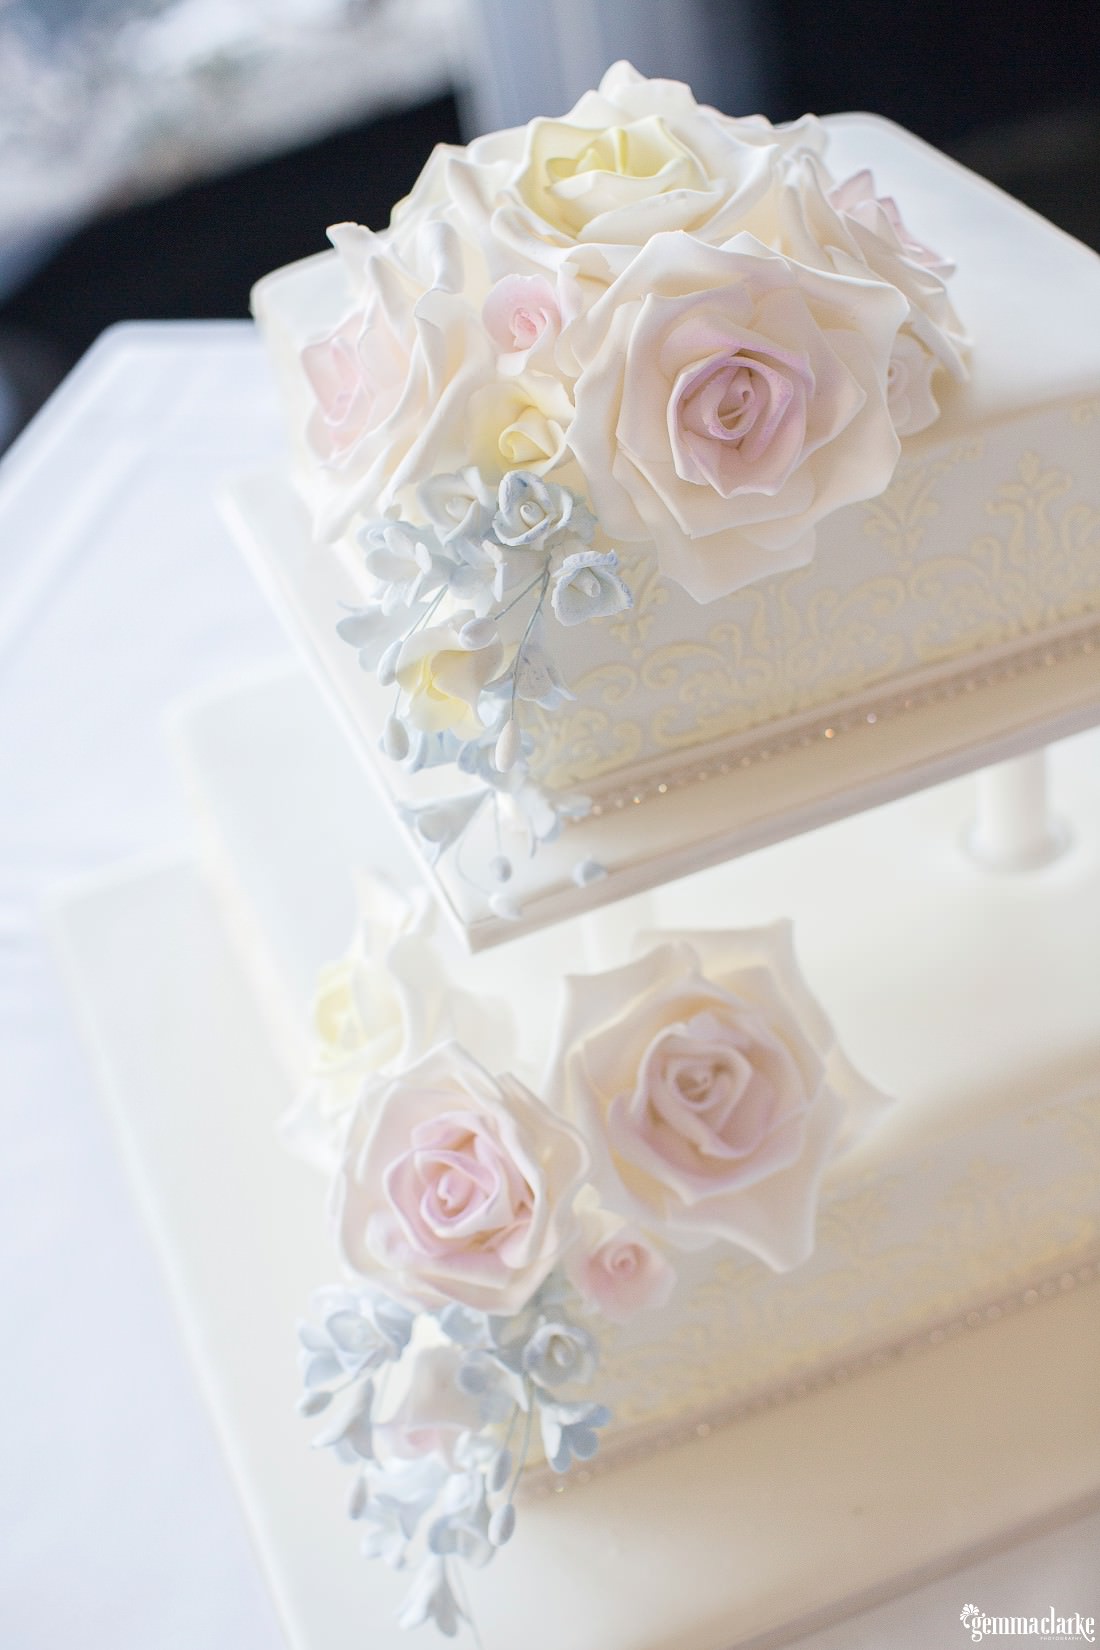 Two tiered white wedding cake with light coloured flower decorations - Dairy Precinct Wedding